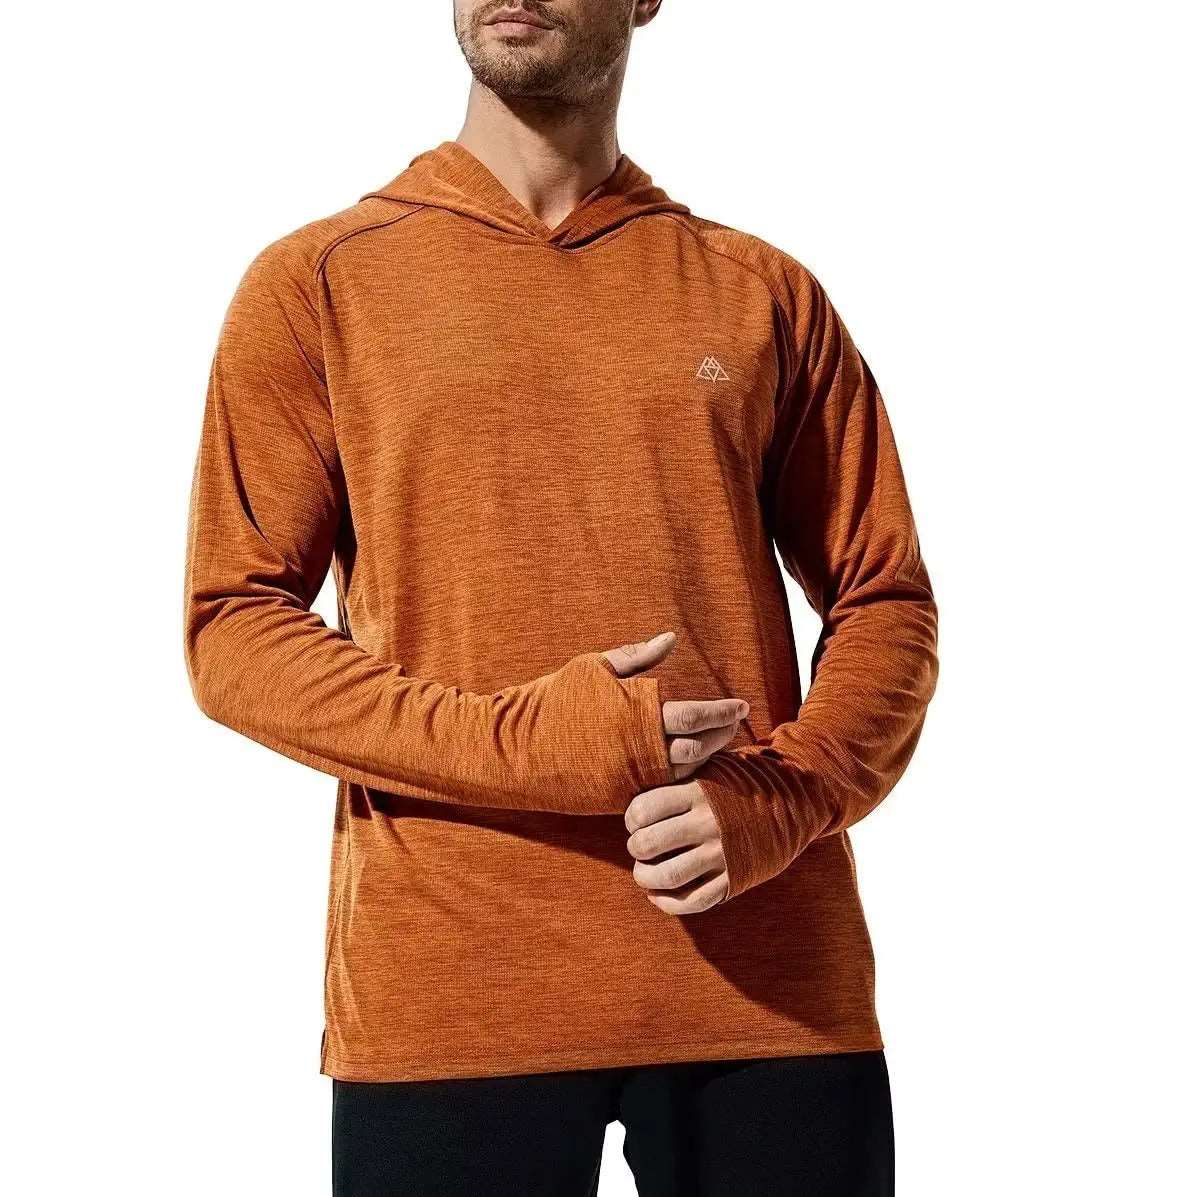 Haimont Men's UPF 50+ Sun Protection Hoodie Shirt with Thumbholes, Brown / 2XL